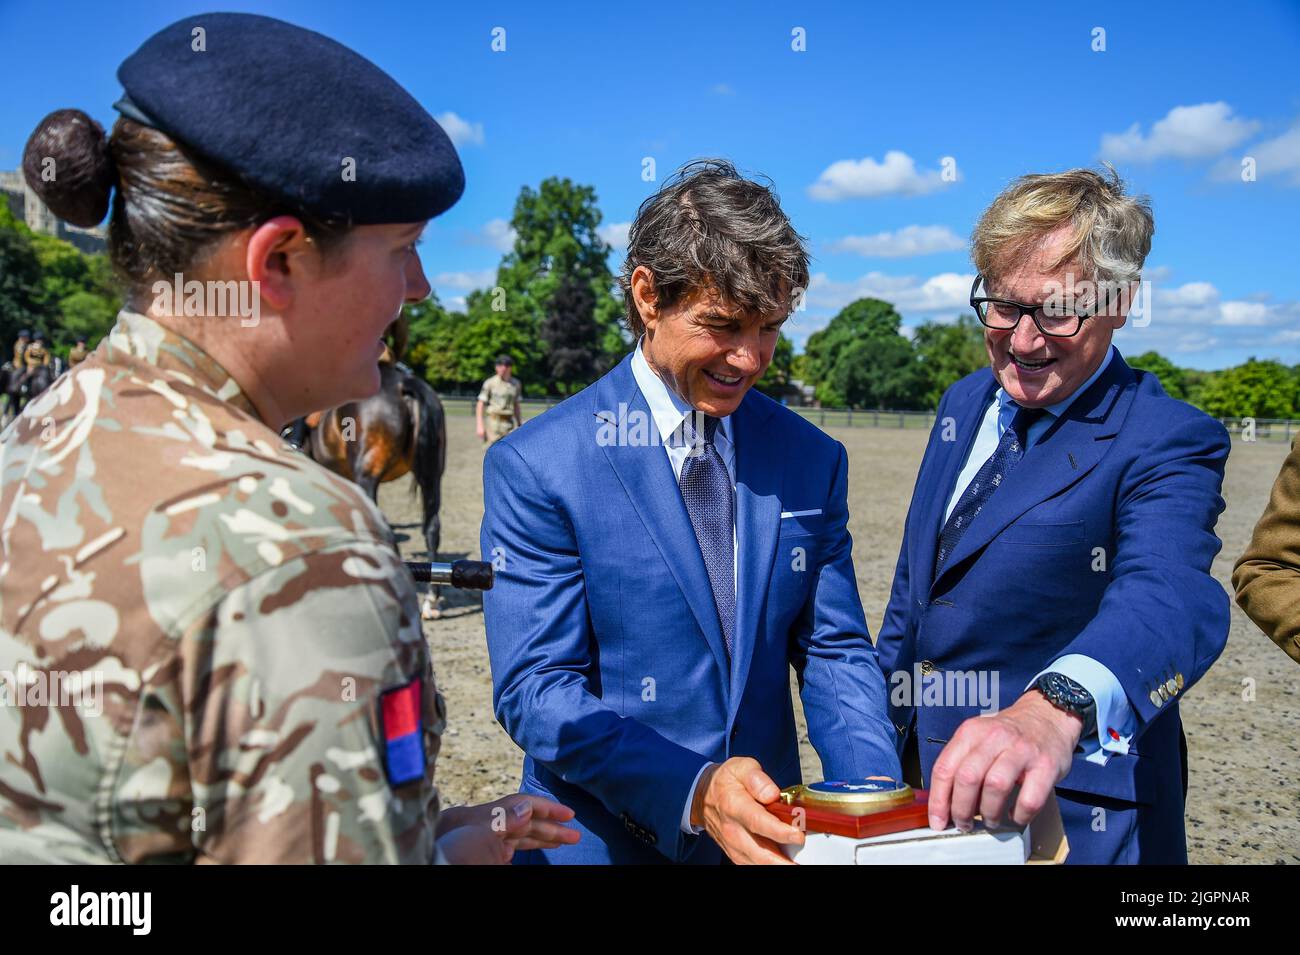 Windsor Castle, Windsor, Berkshire, UK. 8th July 2022. EMBARGOED UNTIL 12th JULY  Tom Cruise receiving the regimental shield during a a private visit to meet members of the King's Troop Royal Horse Artillery, who he introduced during the Platinum Jubilee Celebration back in May, which Tom introduced, on a private visit in the Private Grounds of Windsor Castle   Credit:Peter Nixon/Alamy Live News Stock Photo